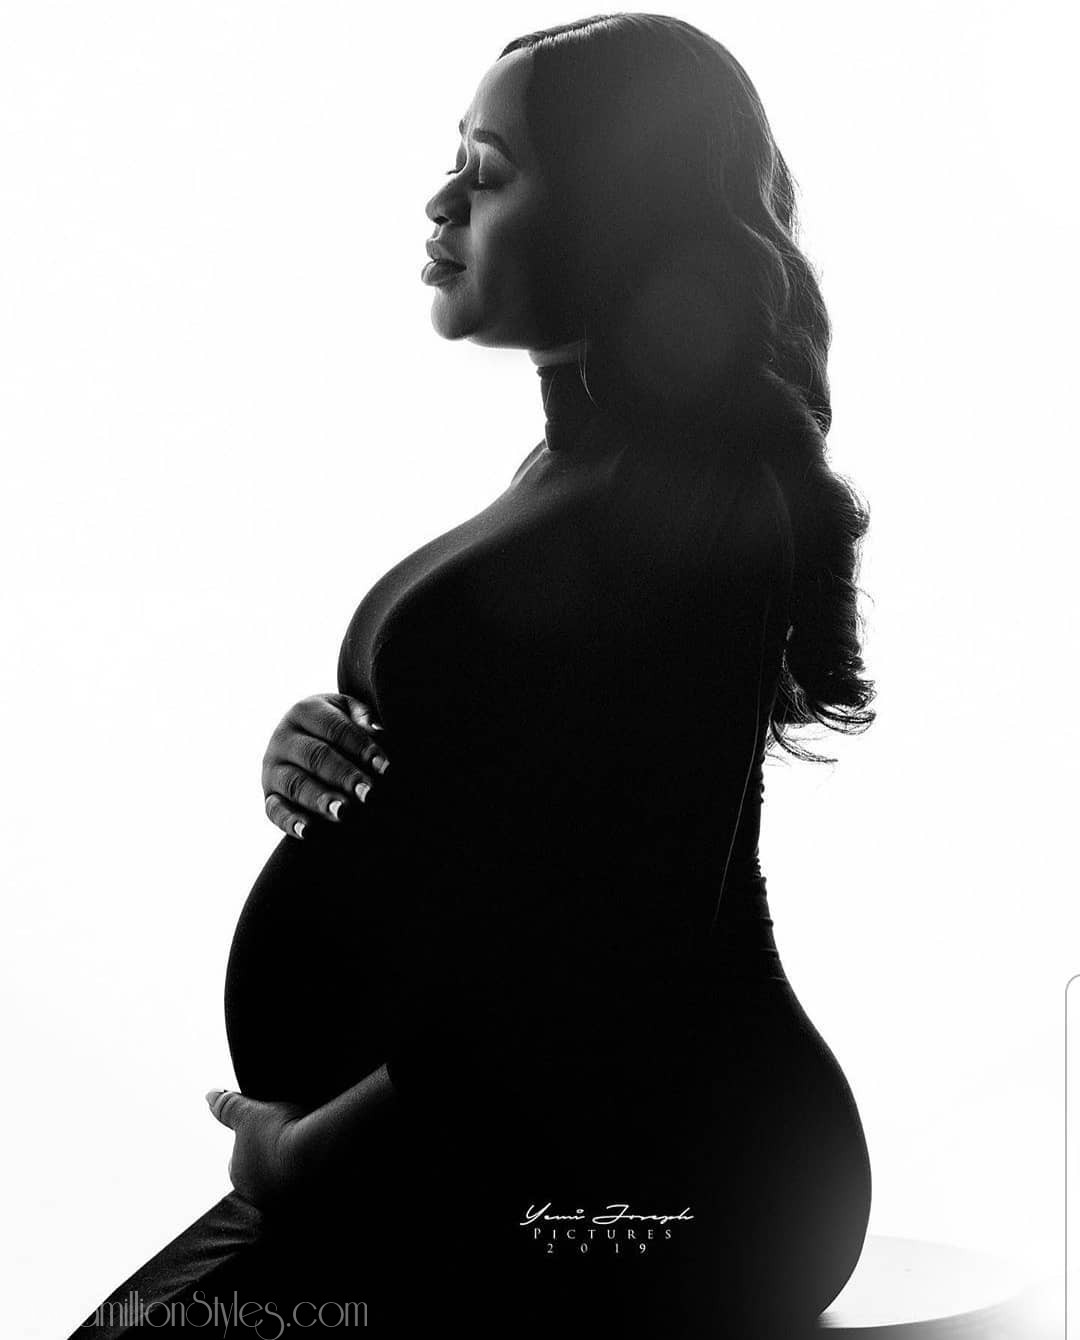 Would You Rock Black For Your Maternity Photo-shoot?